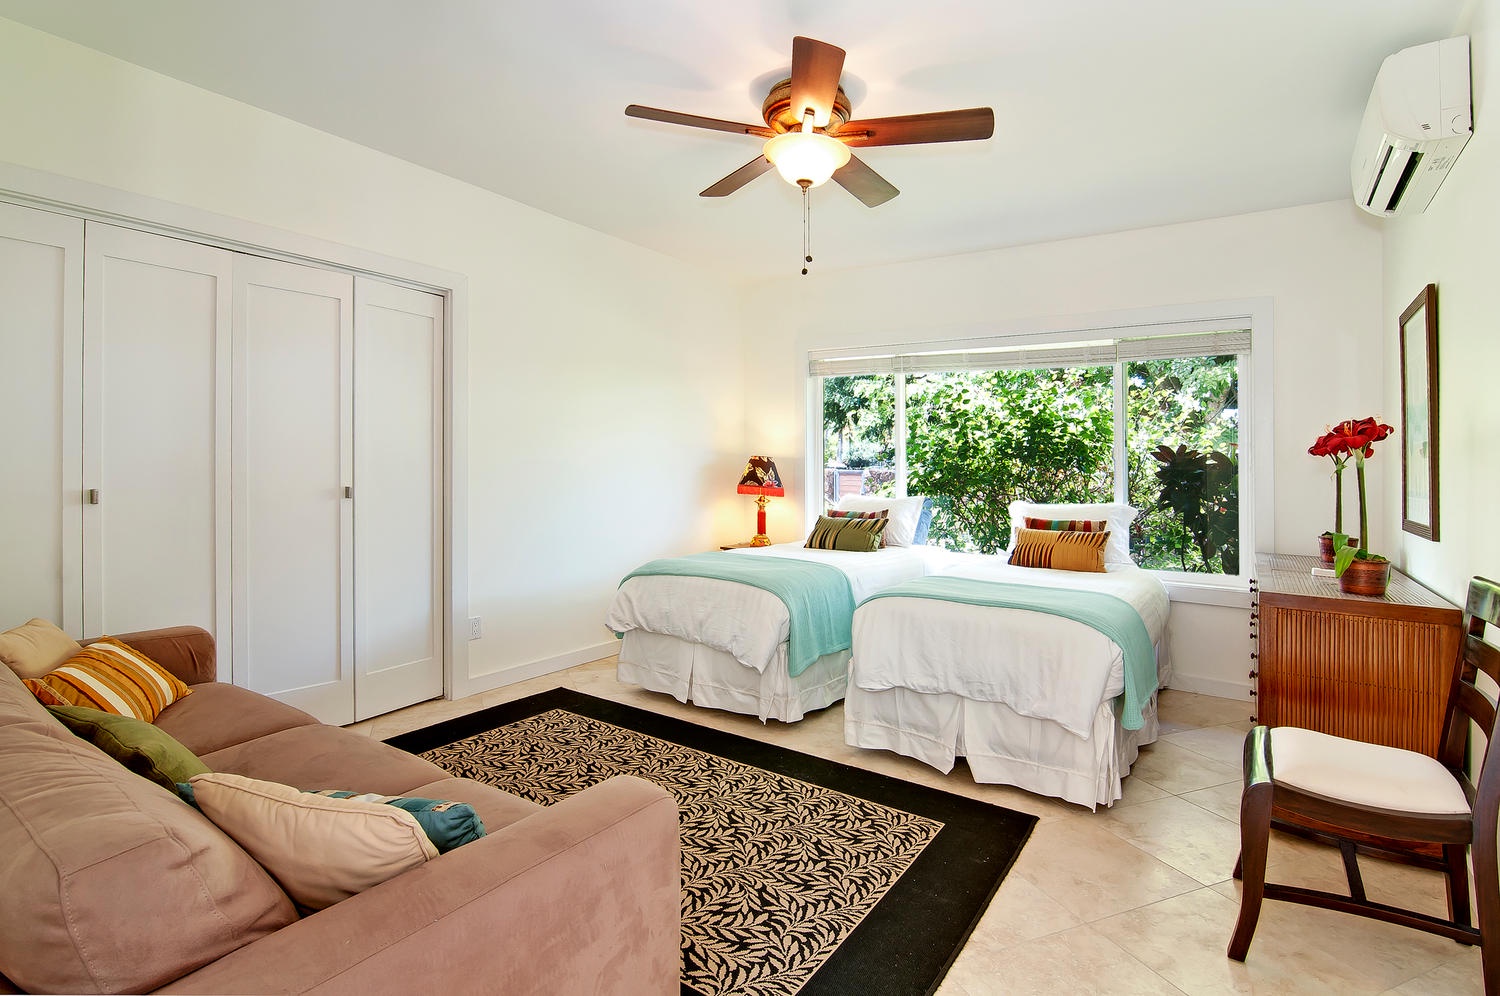 Honolulu Vacation Rentals, Kahala Lani - Bedroom Three - Two twin beds (convertible to a king upon request), Sofa bed (queen), room sleeps four